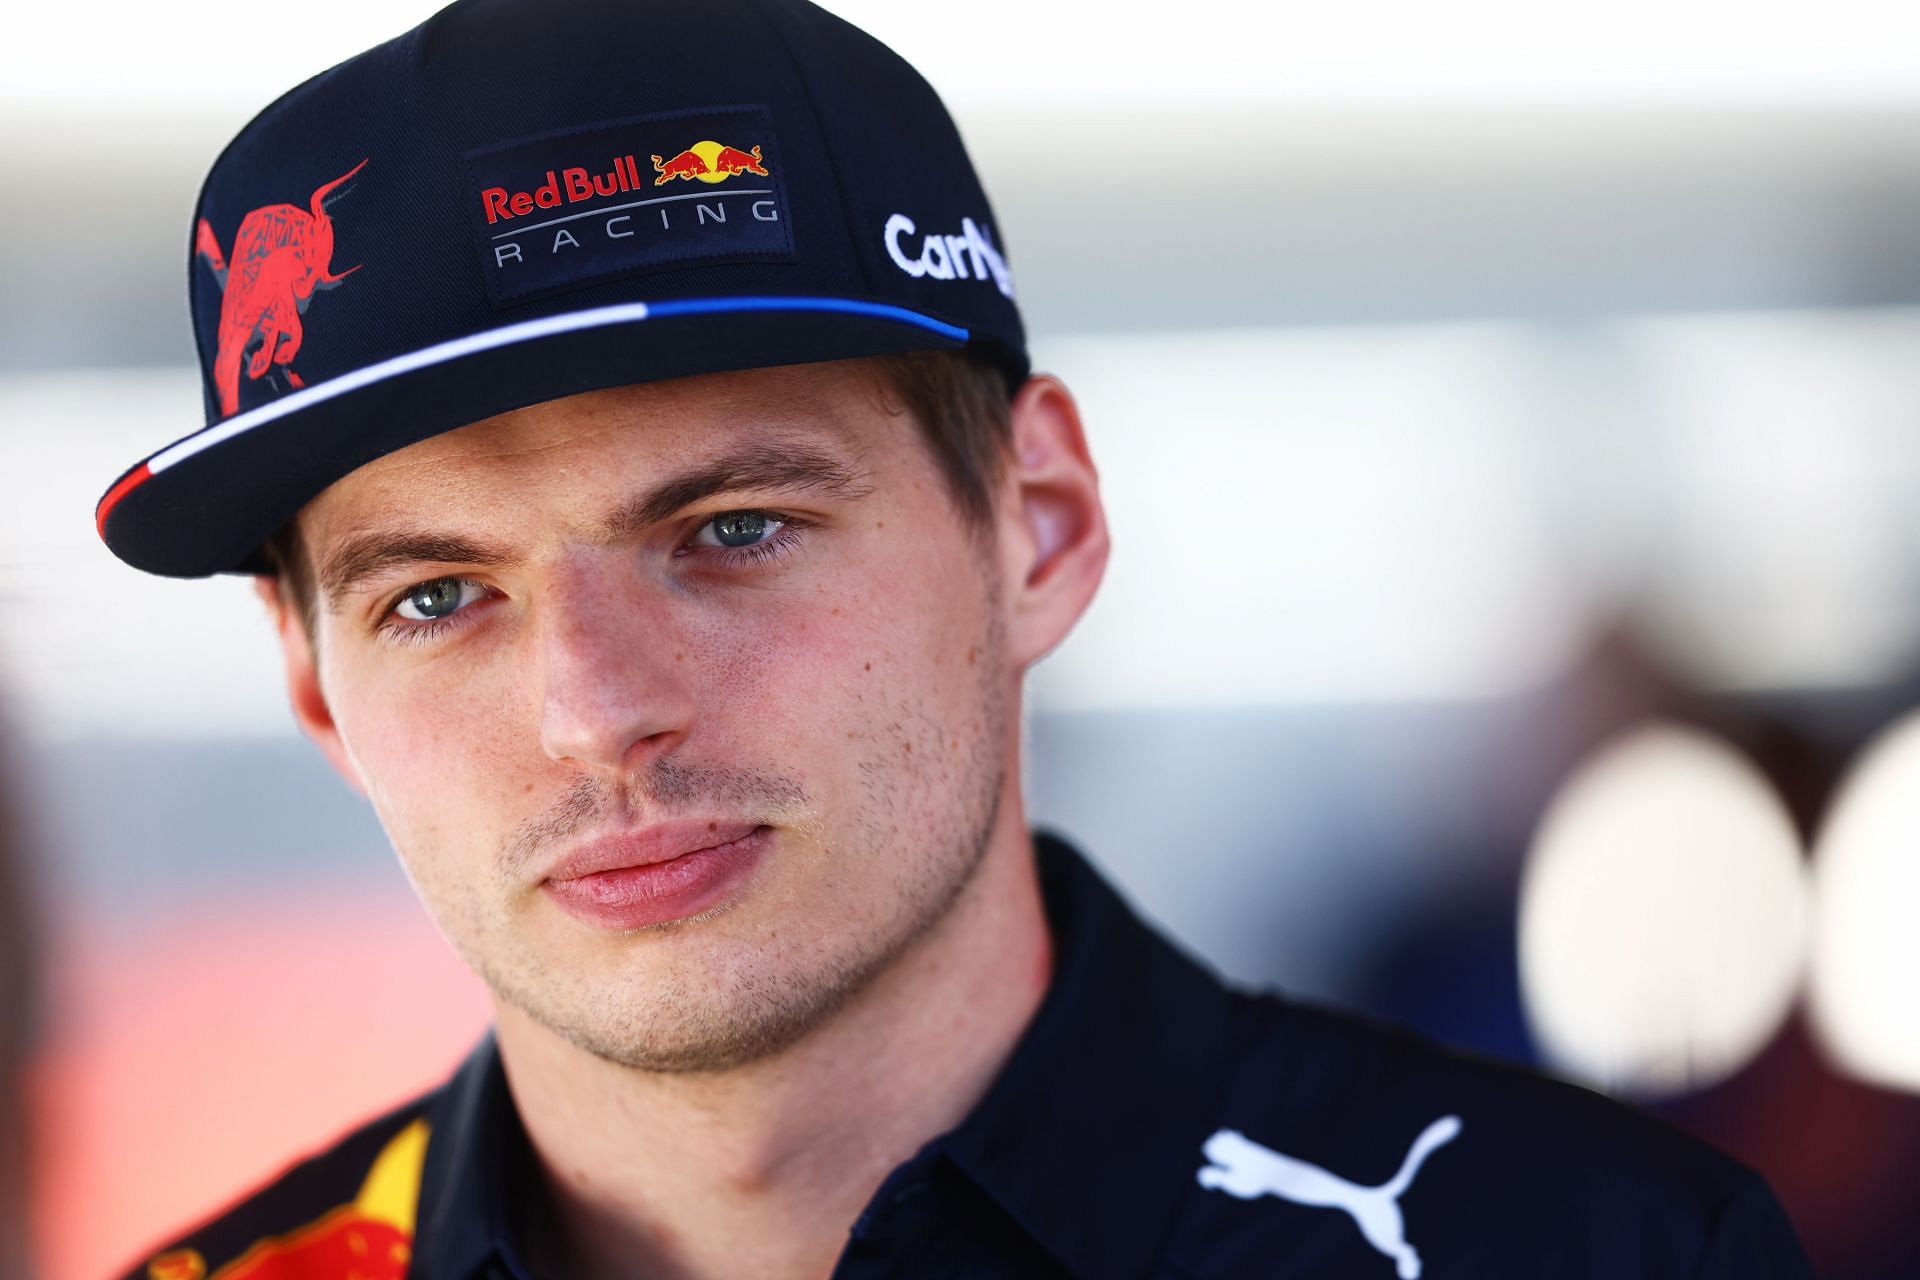 Max Verstappen talks to the media in the Paddock prior to practice ahead of the F1 Grand Prix of Azerbaijan at Baku City Circuit on June 10, 2022 in Baku, Azerbaijan. (Photo by Mark Thompson/Getty Images)